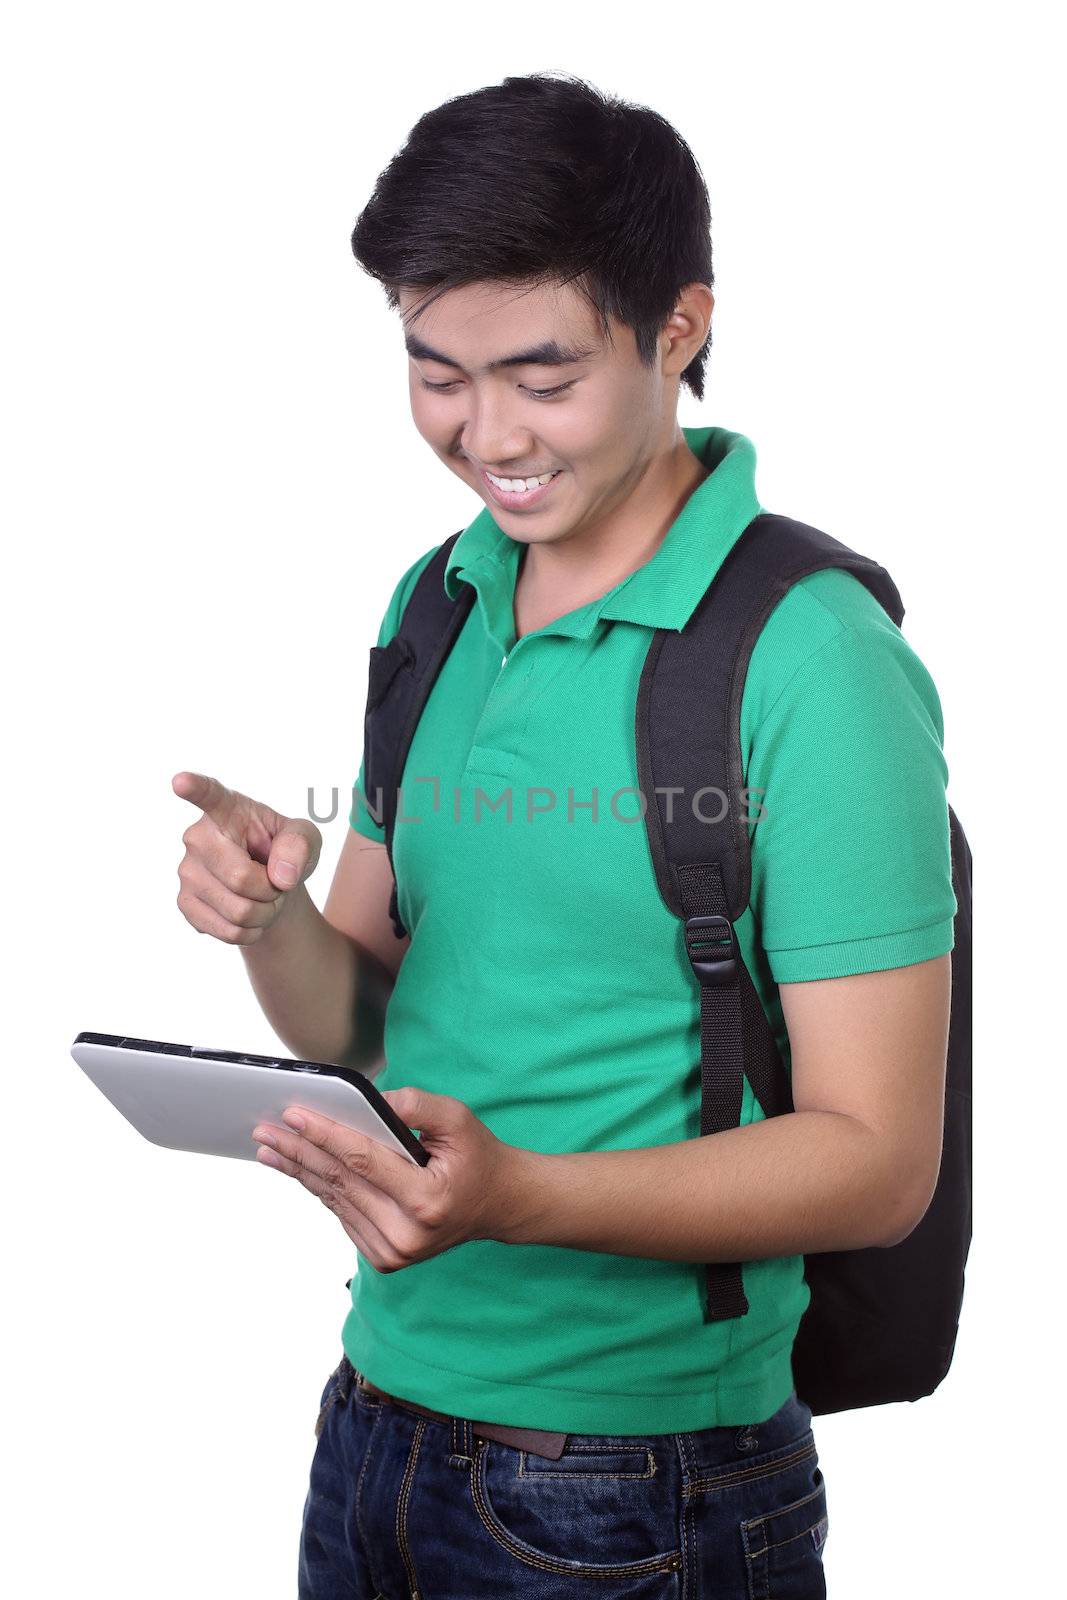 Asian man holding a digital touch screen tablet computer on white background. by frexifaces